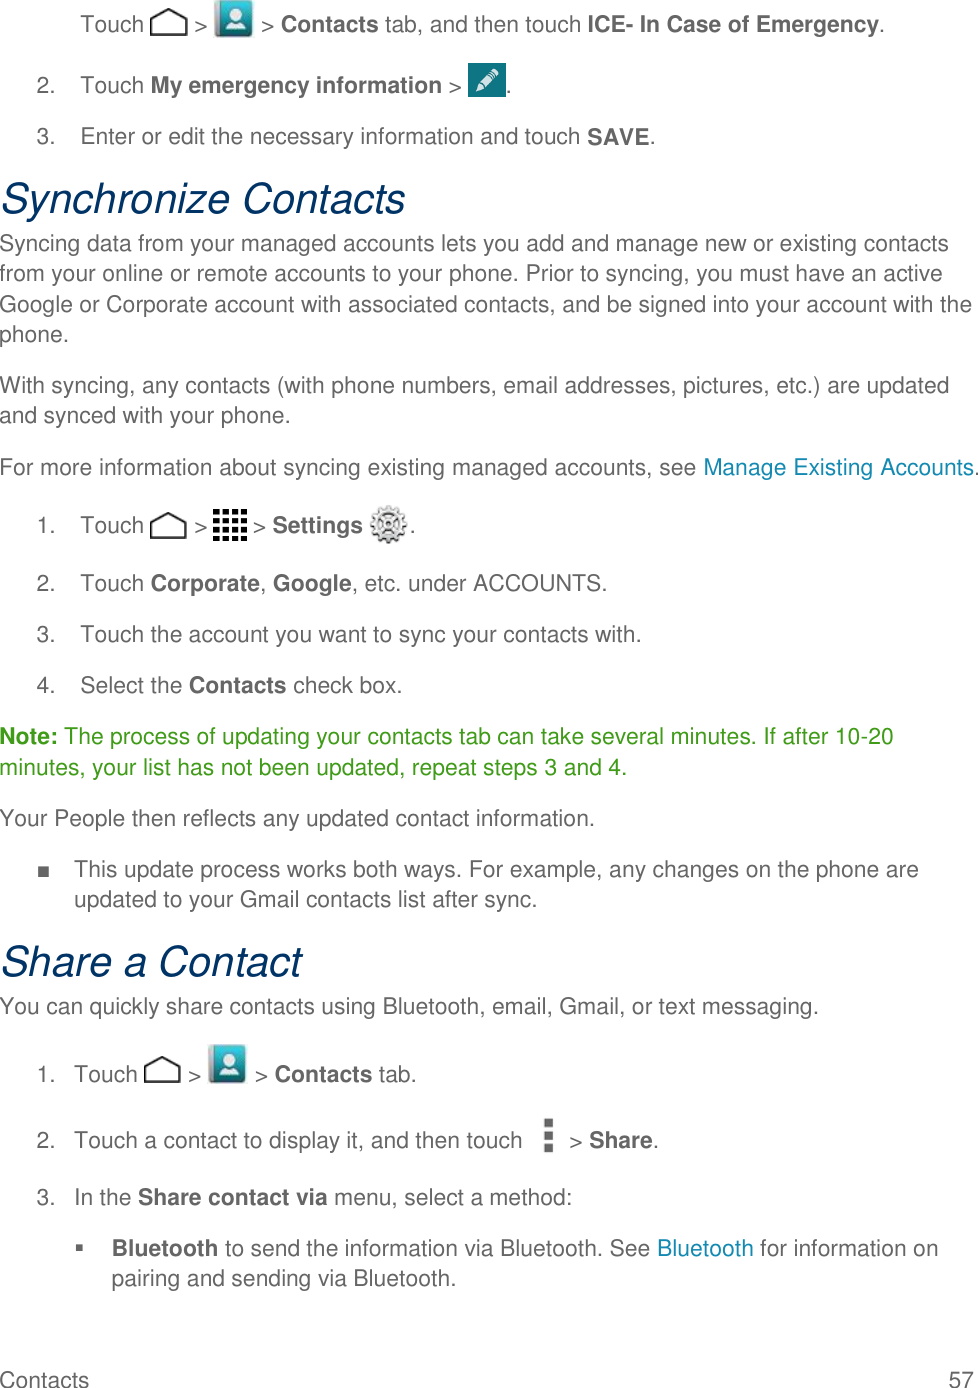 Contacts    57  Touch   &gt;   &gt; Contacts tab, and then touch ICE- In Case of Emergency. 2.  Touch My emergency information &gt;  . 3.  Enter or edit the necessary information and touch SAVE. Synchronize Contacts Syncing data from your managed accounts lets you add and manage new or existing contacts from your online or remote accounts to your phone. Prior to syncing, you must have an active Google or Corporate account with associated contacts, and be signed into your account with the phone. With syncing, any contacts (with phone numbers, email addresses, pictures, etc.) are updated and synced with your phone. For more information about syncing existing managed accounts, see Manage Existing Accounts. 1.  Touch   &gt;   &gt; Settings  . 2.  Touch Corporate, Google, etc. under ACCOUNTS. 3.  Touch the account you want to sync your contacts with. 4.  Select the Contacts check box. Note: The process of updating your contacts tab can take several minutes. If after 10-20 minutes, your list has not been updated, repeat steps 3 and 4. Your People then reflects any updated contact information. ■  This update process works both ways. For example, any changes on the phone are updated to your Gmail contacts list after sync. Share a Contact You can quickly share contacts using Bluetooth, email, Gmail, or text messaging. 1.  Touch   &gt;   &gt; Contacts tab. 2.  Touch a contact to display it, and then touch &gt; Share. 3.  In the Share contact via menu, select a method:  Bluetooth to send the information via Bluetooth. See Bluetooth for information on pairing and sending via Bluetooth. 